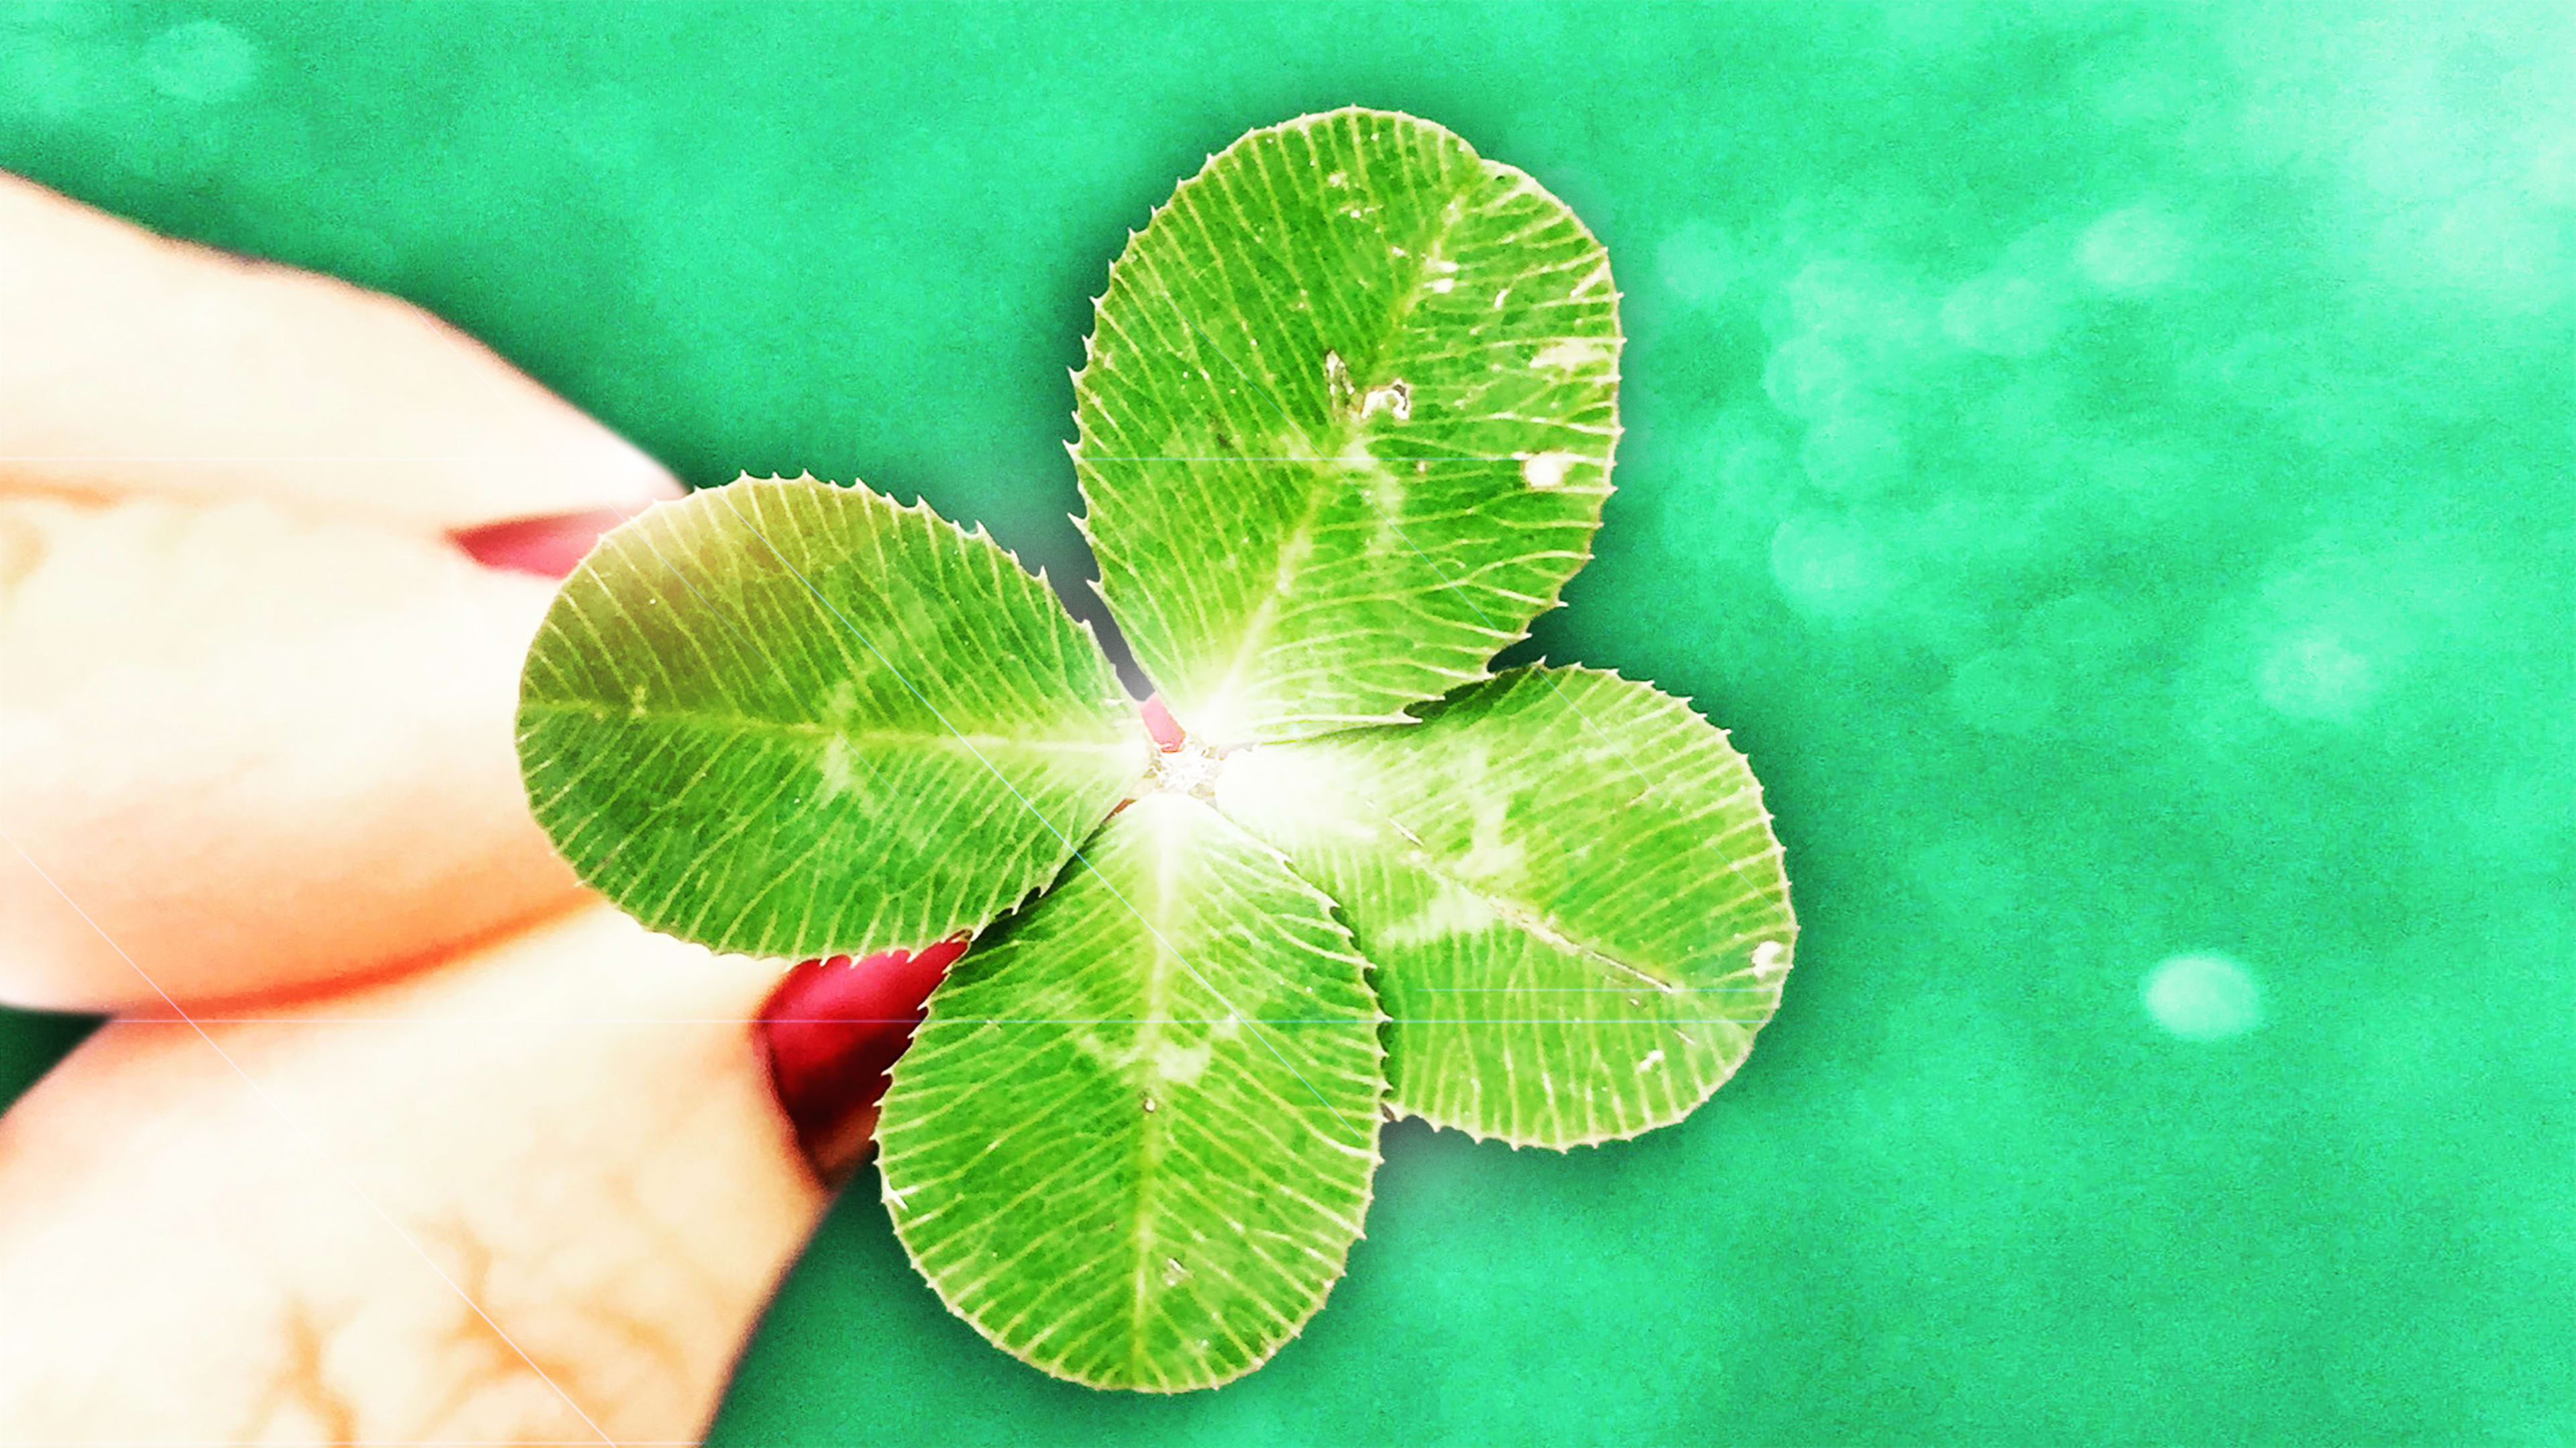 How to get lucky, especially if you’re starting a new venture, according to research